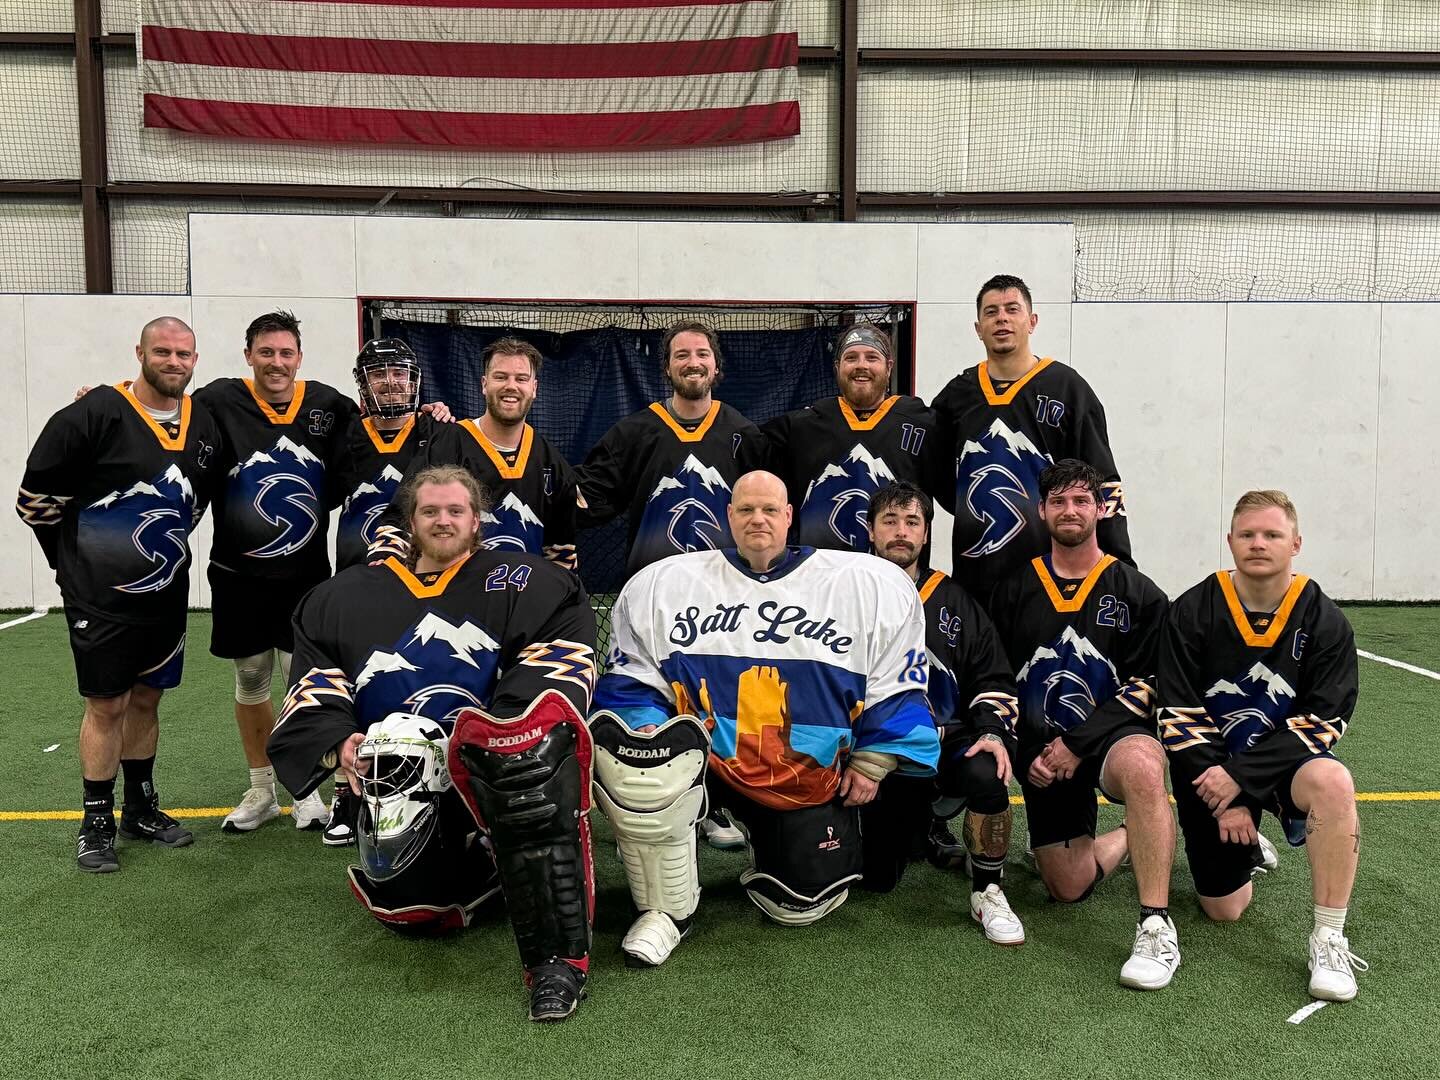 Got some great reps in with some great guys this weekend. Thanks to @gunsandhosestx and @capn._oates for hosting us. We had a blast playing new teams &amp; exploring the Dallas-Fort Worth area!